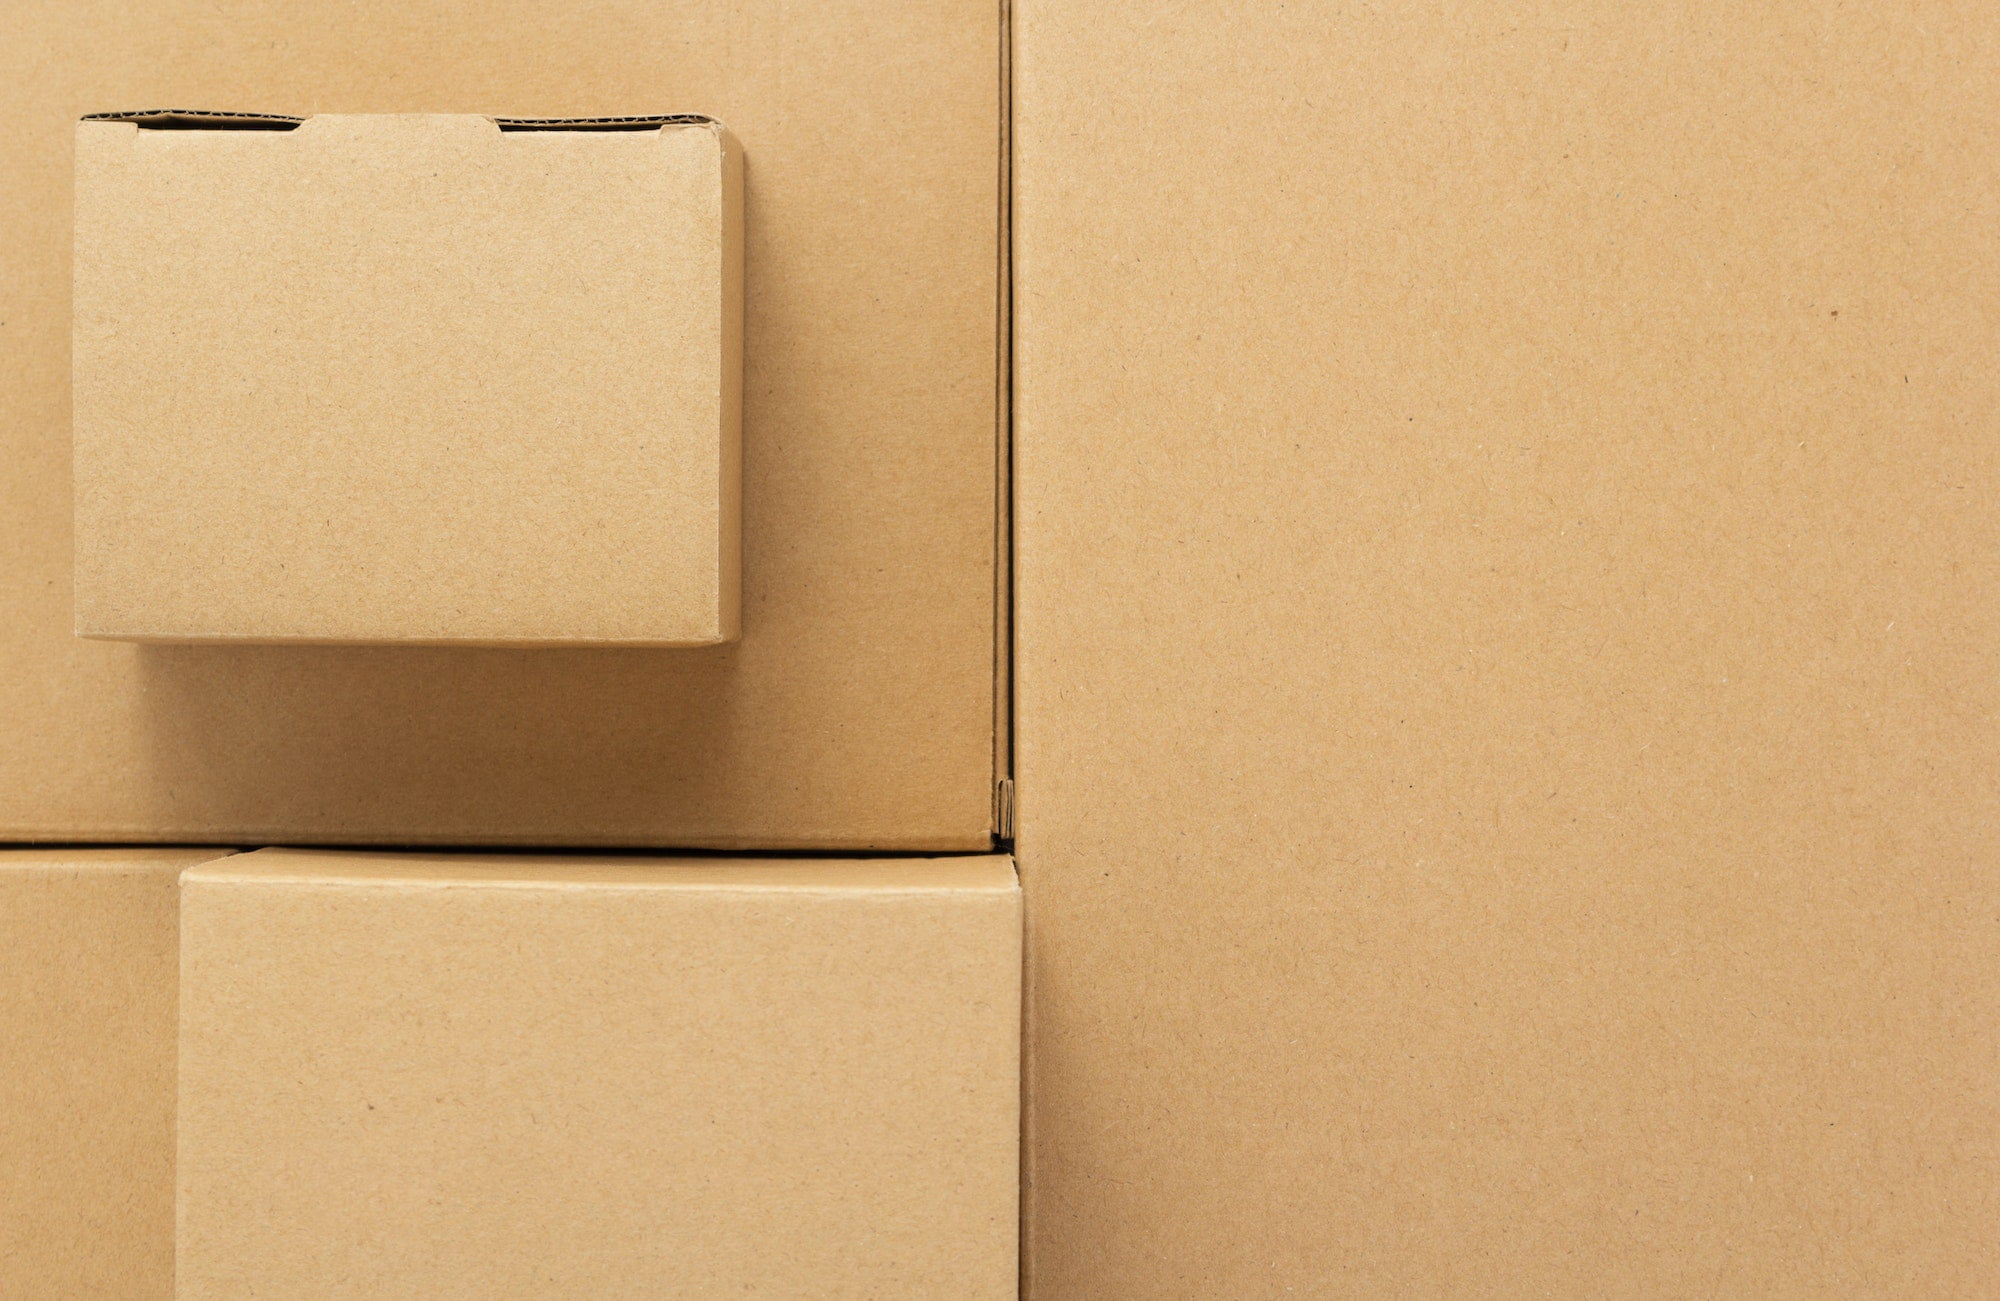 A stack of cardboard boxes on a white background.